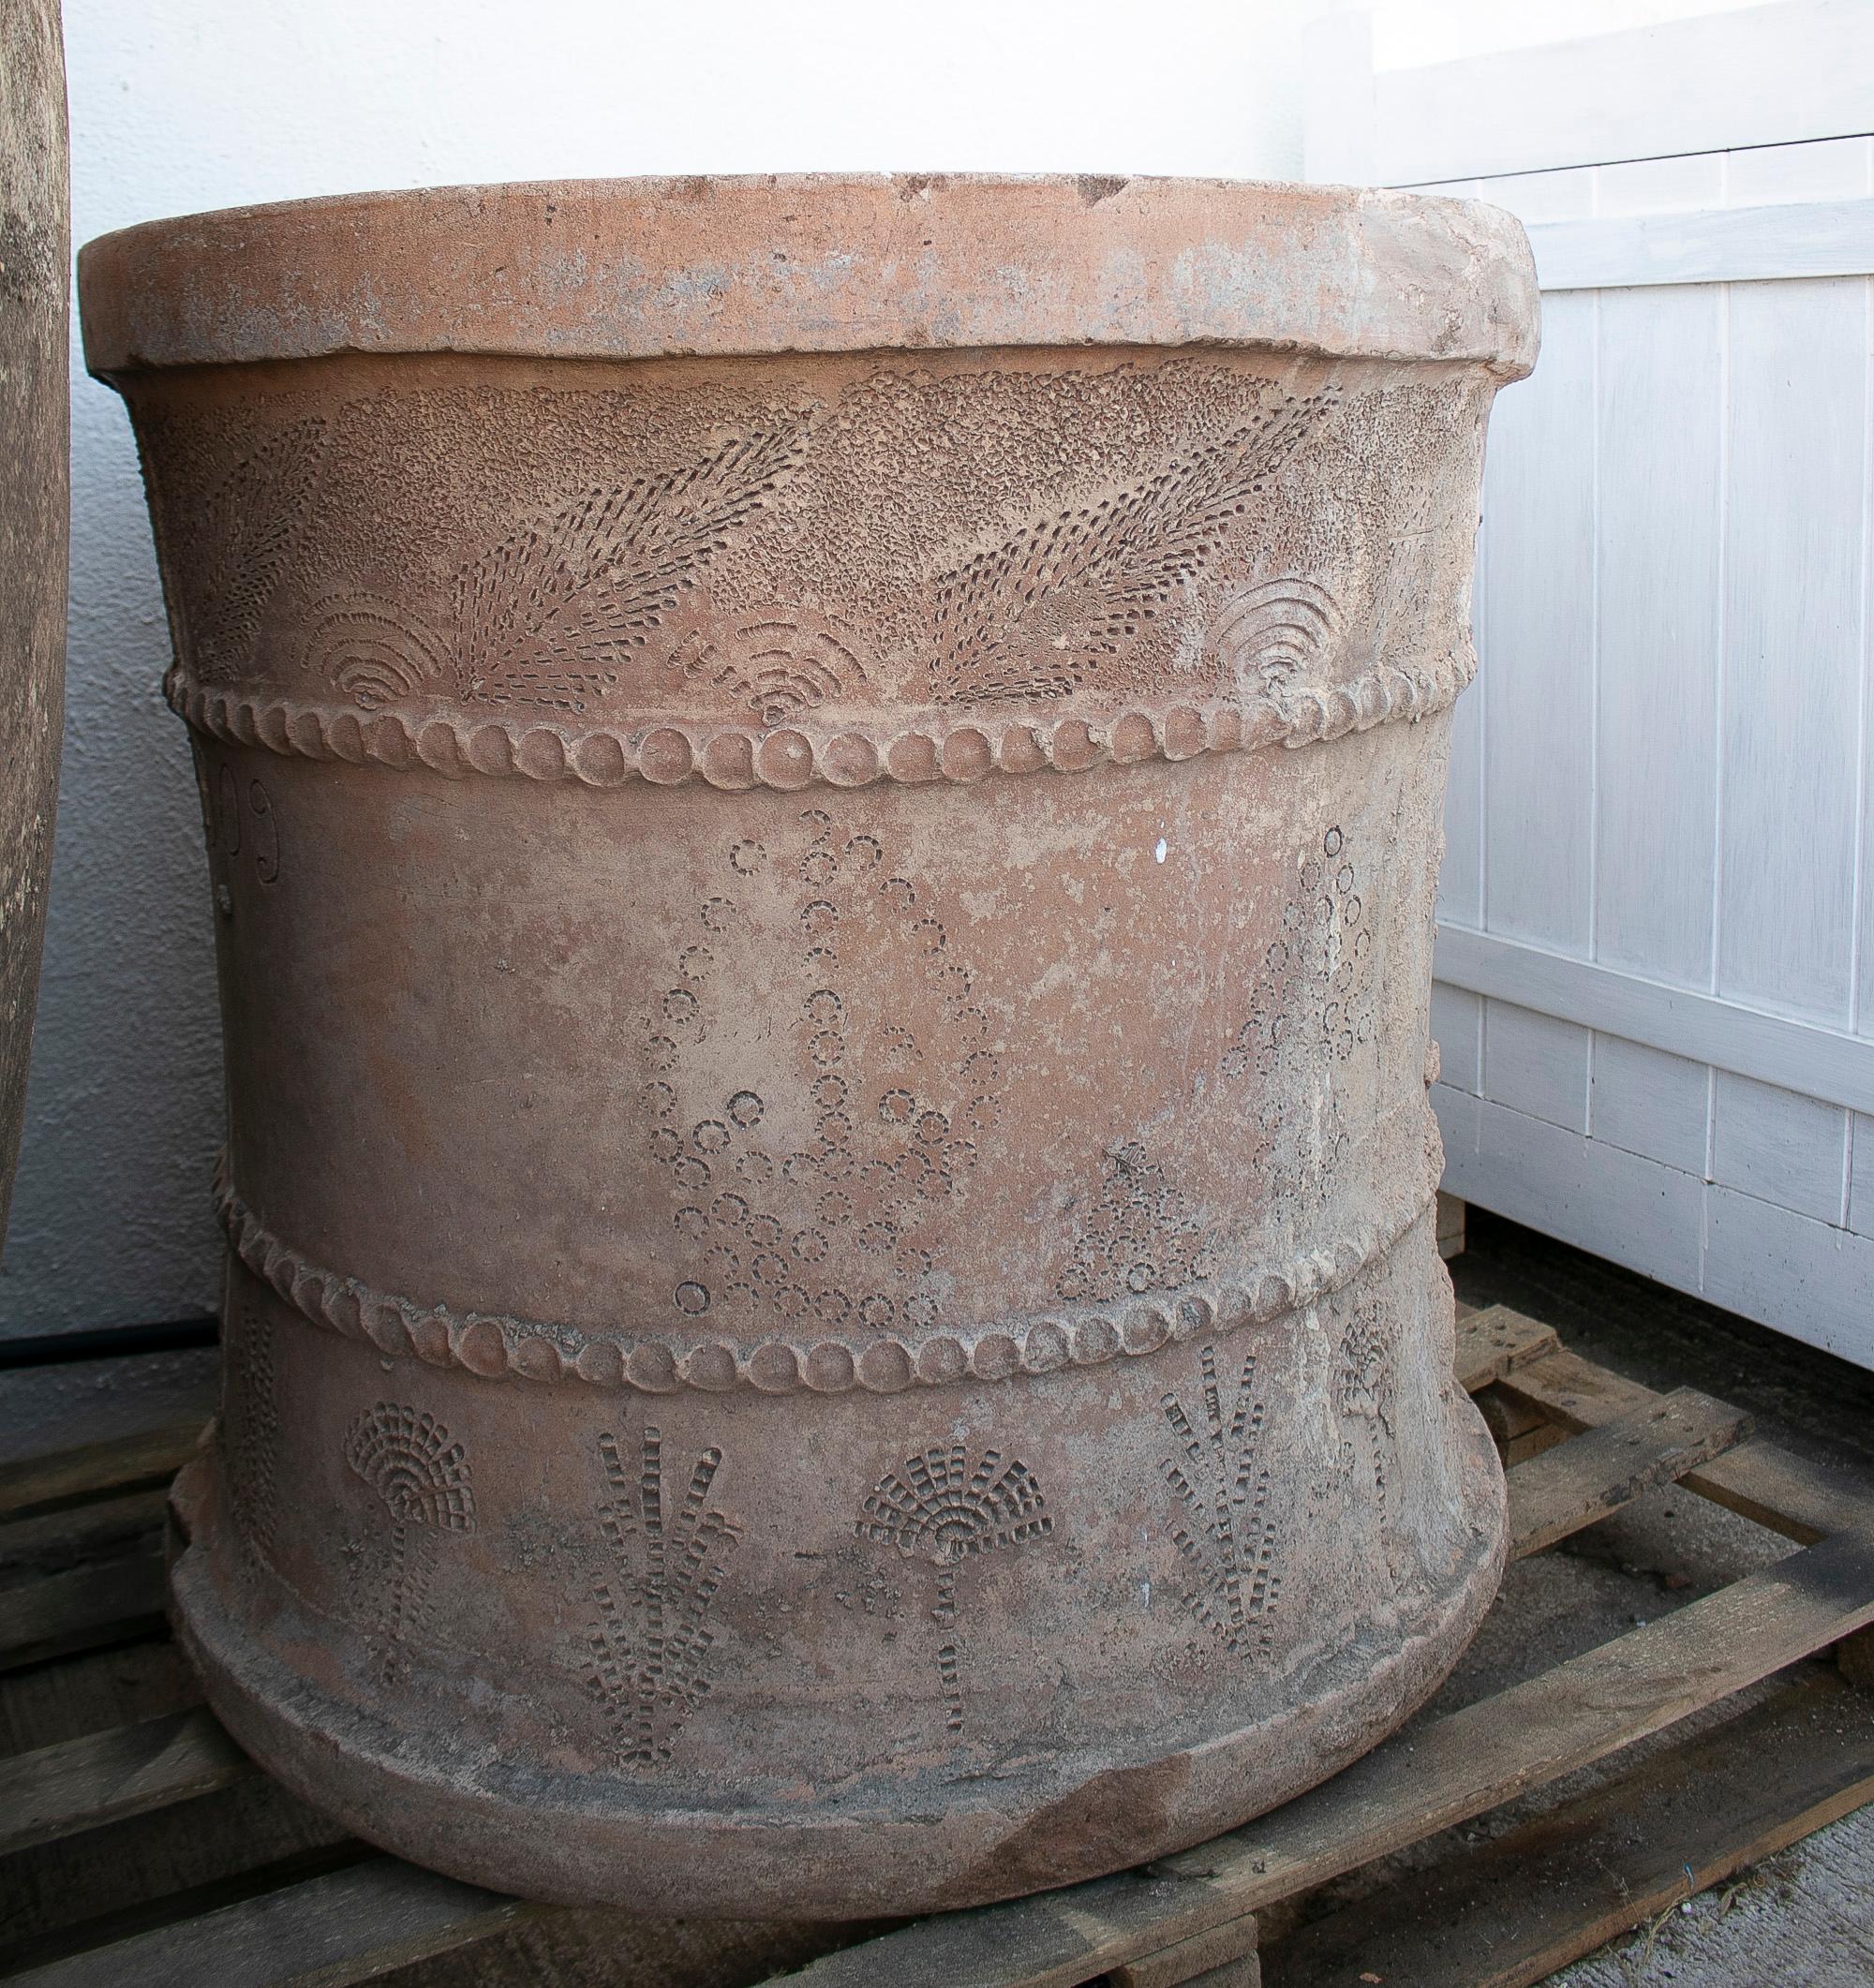 Antique 19th century Spanish handcrafted terracotta water well.